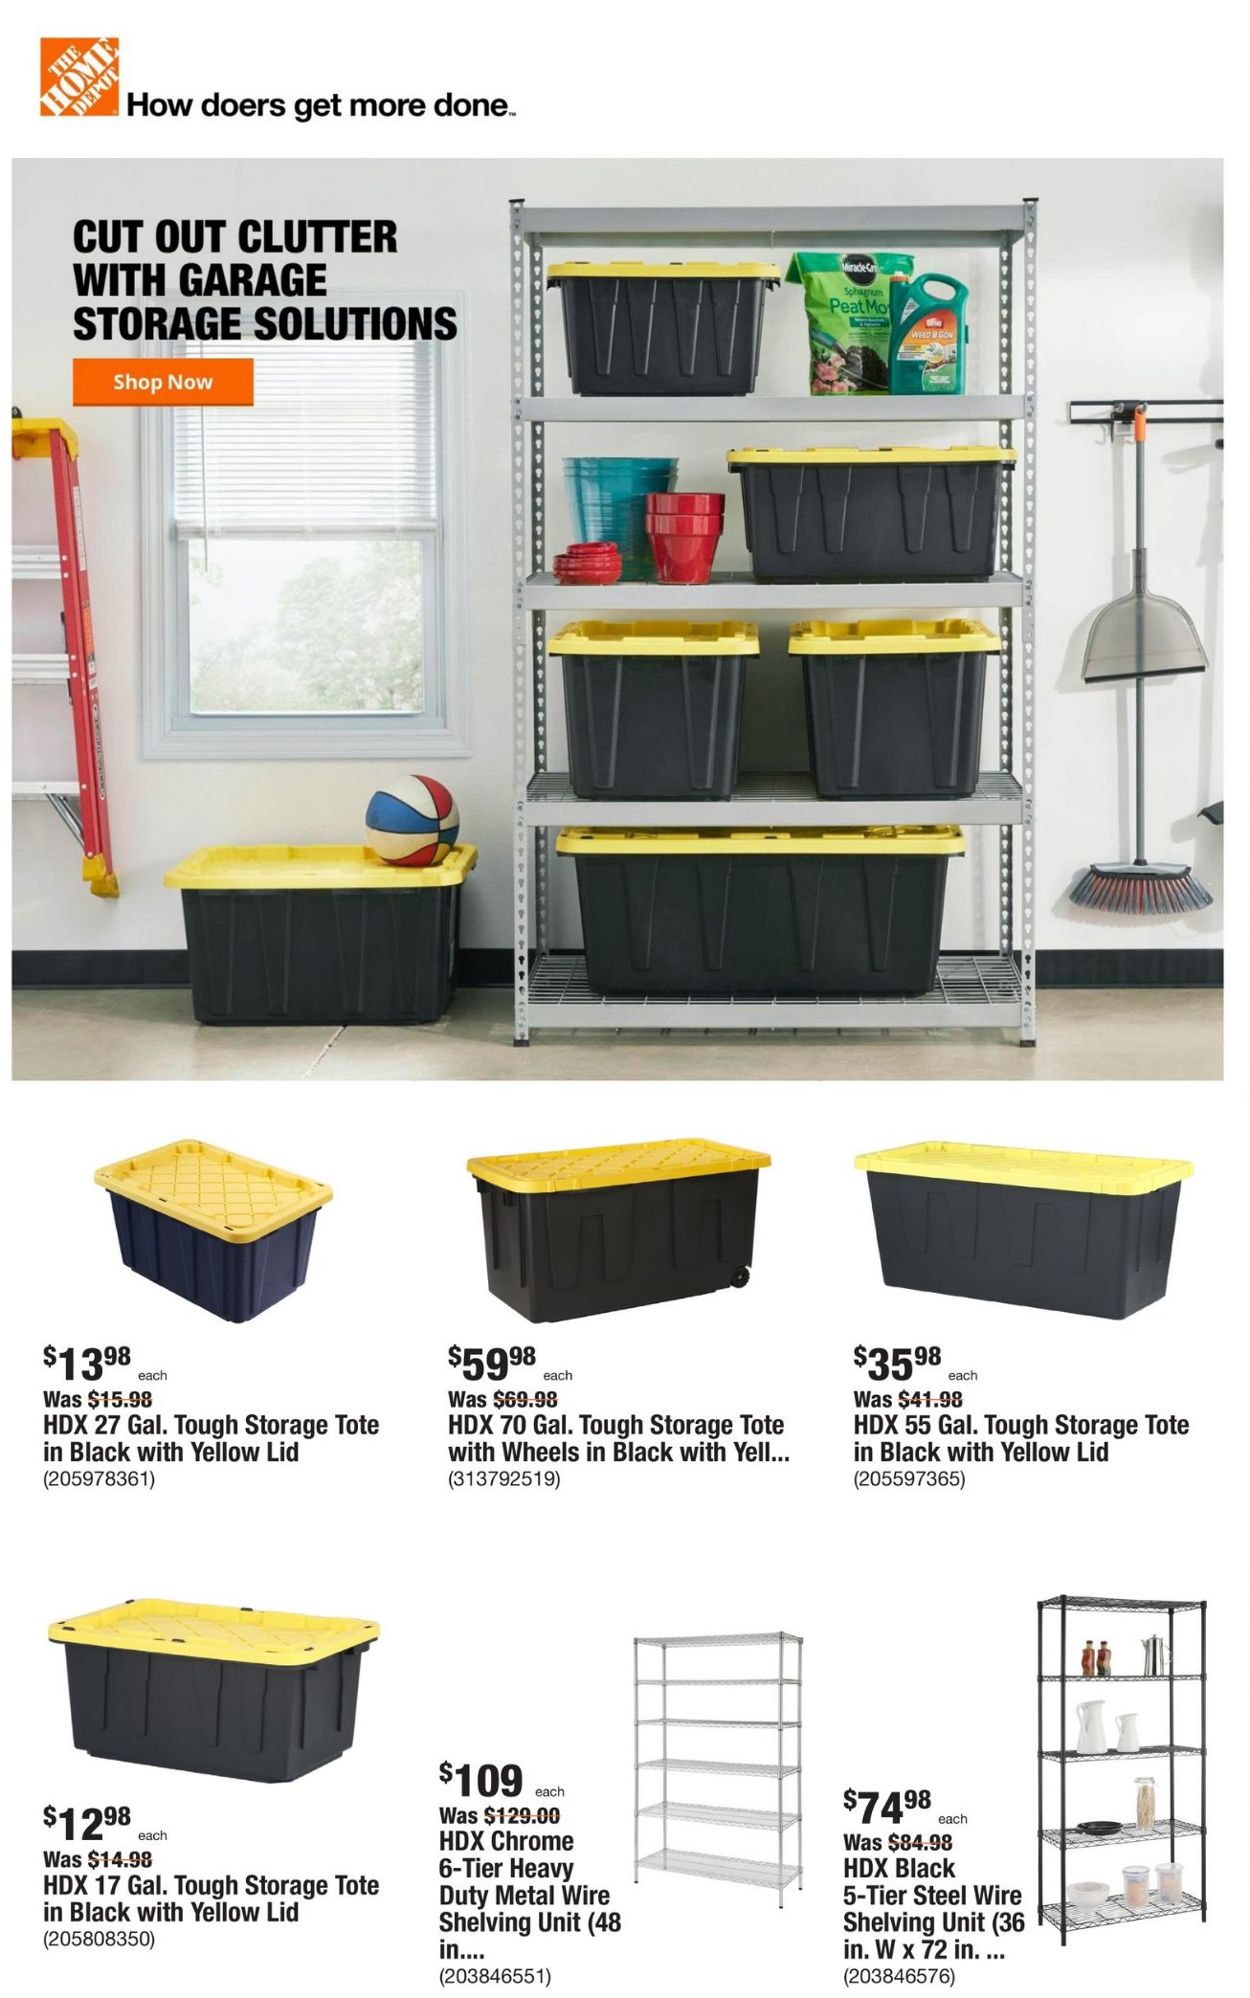 HDX 70 Gal. Tough Storage Tote with Wheels in Black with Yellow